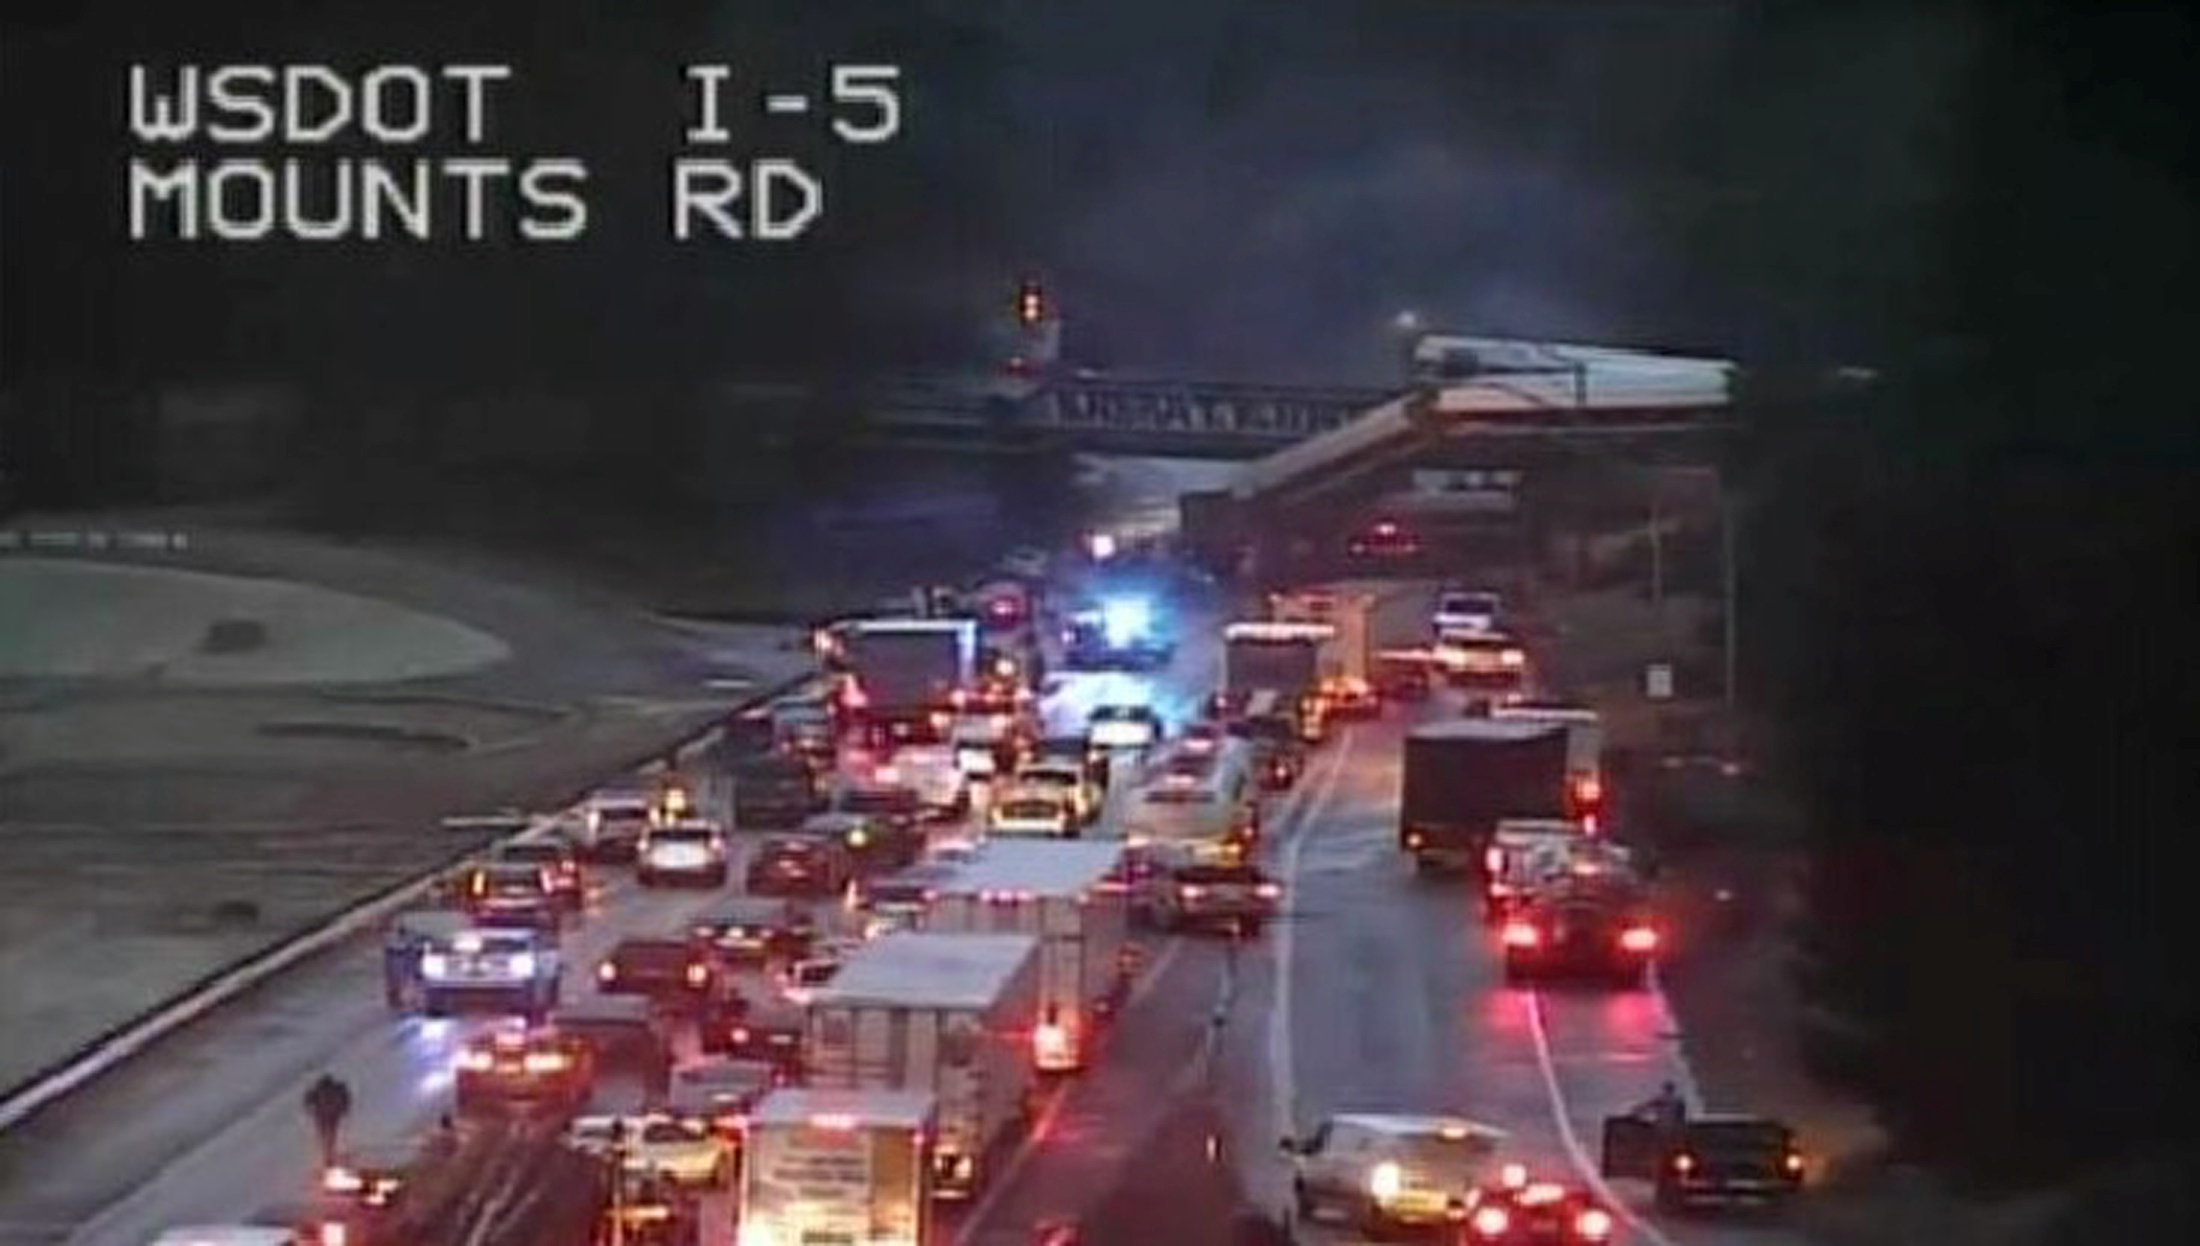 <strong>An Amtrak passenger train in seen derailed on a bridge in Washington State</strong>